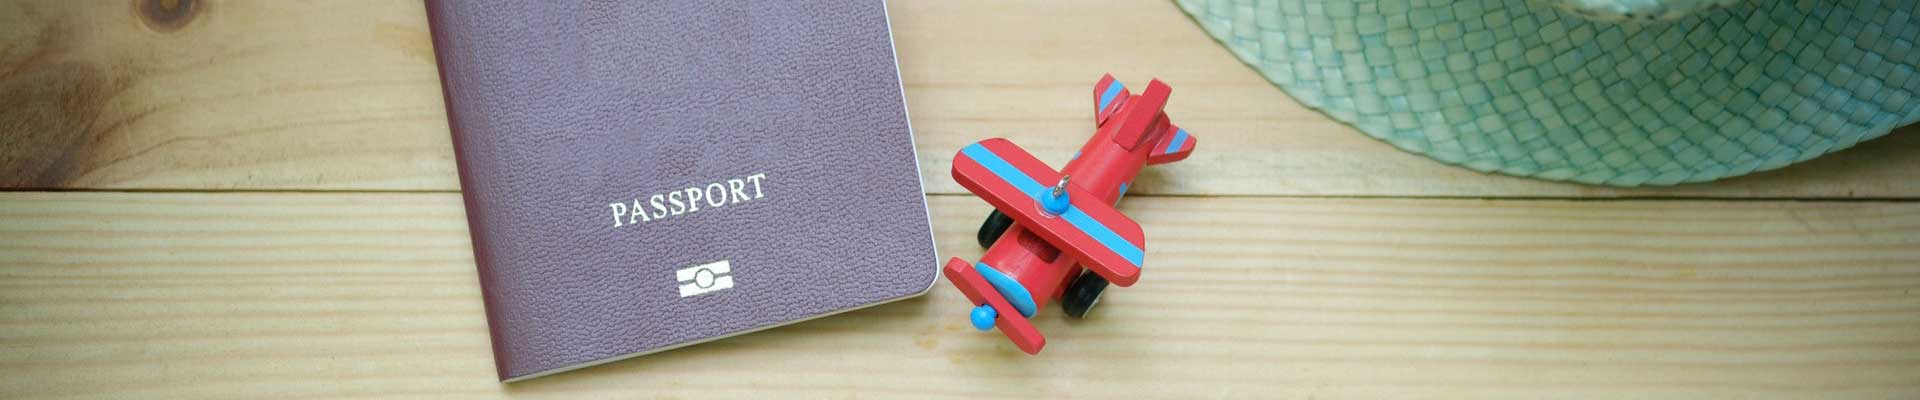 passport with a toy plane